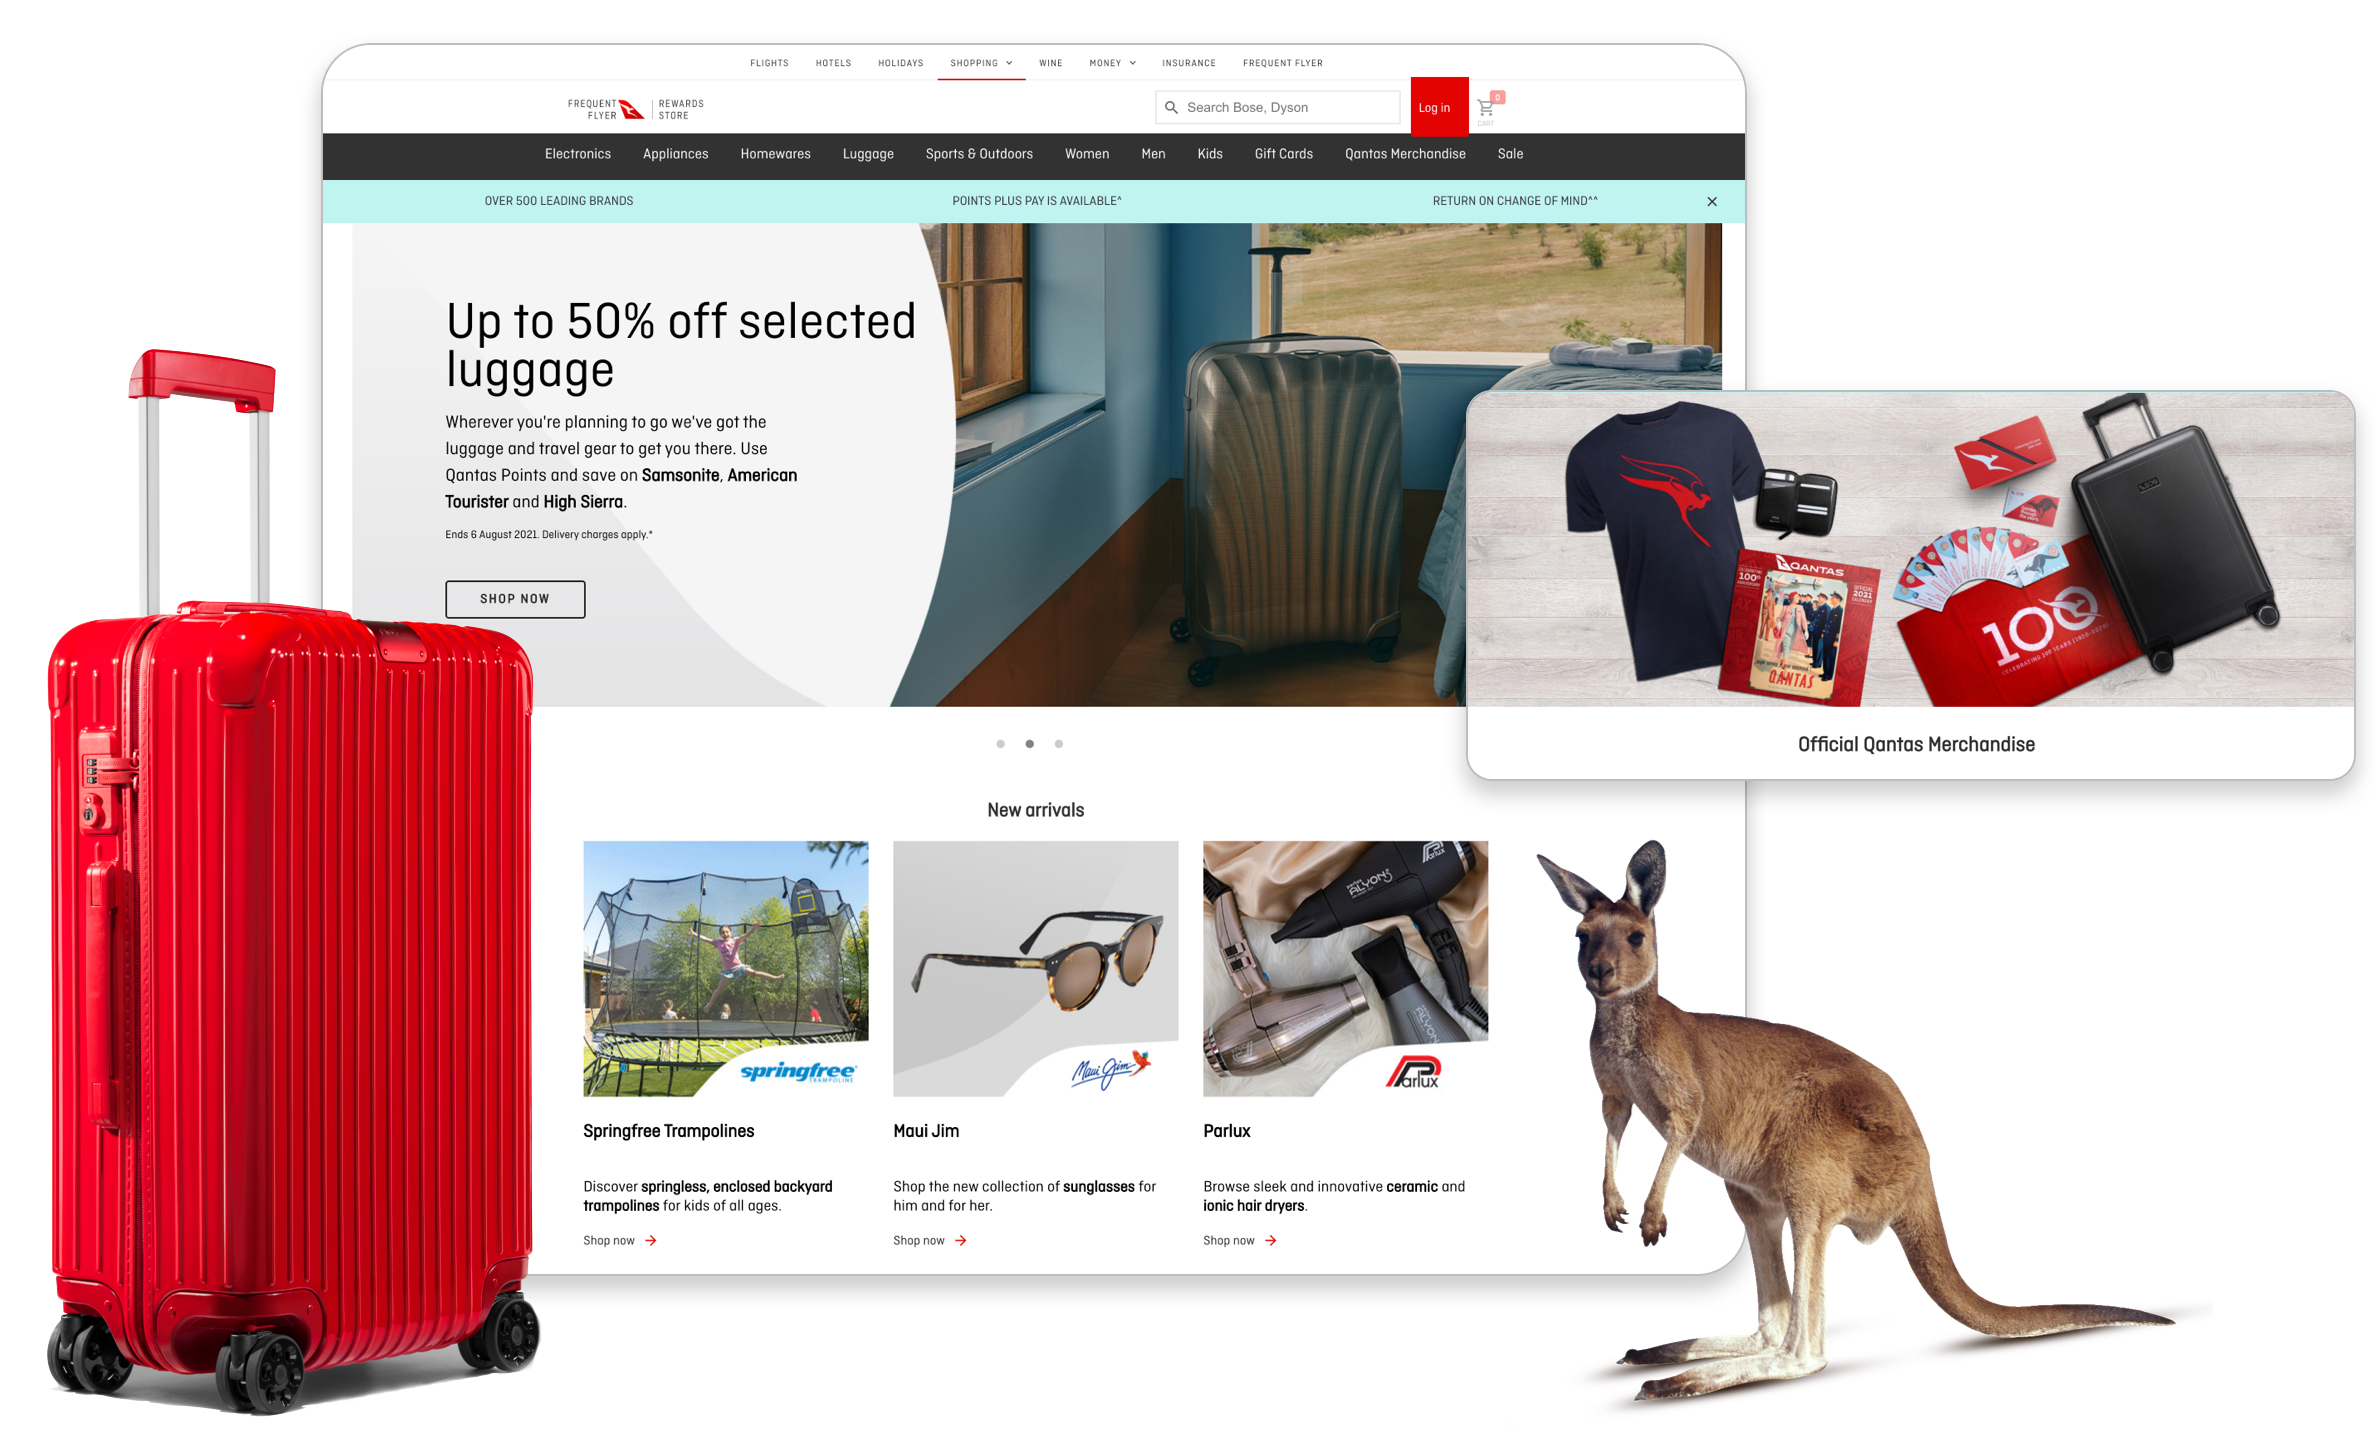 The Qantas Loyalty Store offers improved customer loyalty experiences